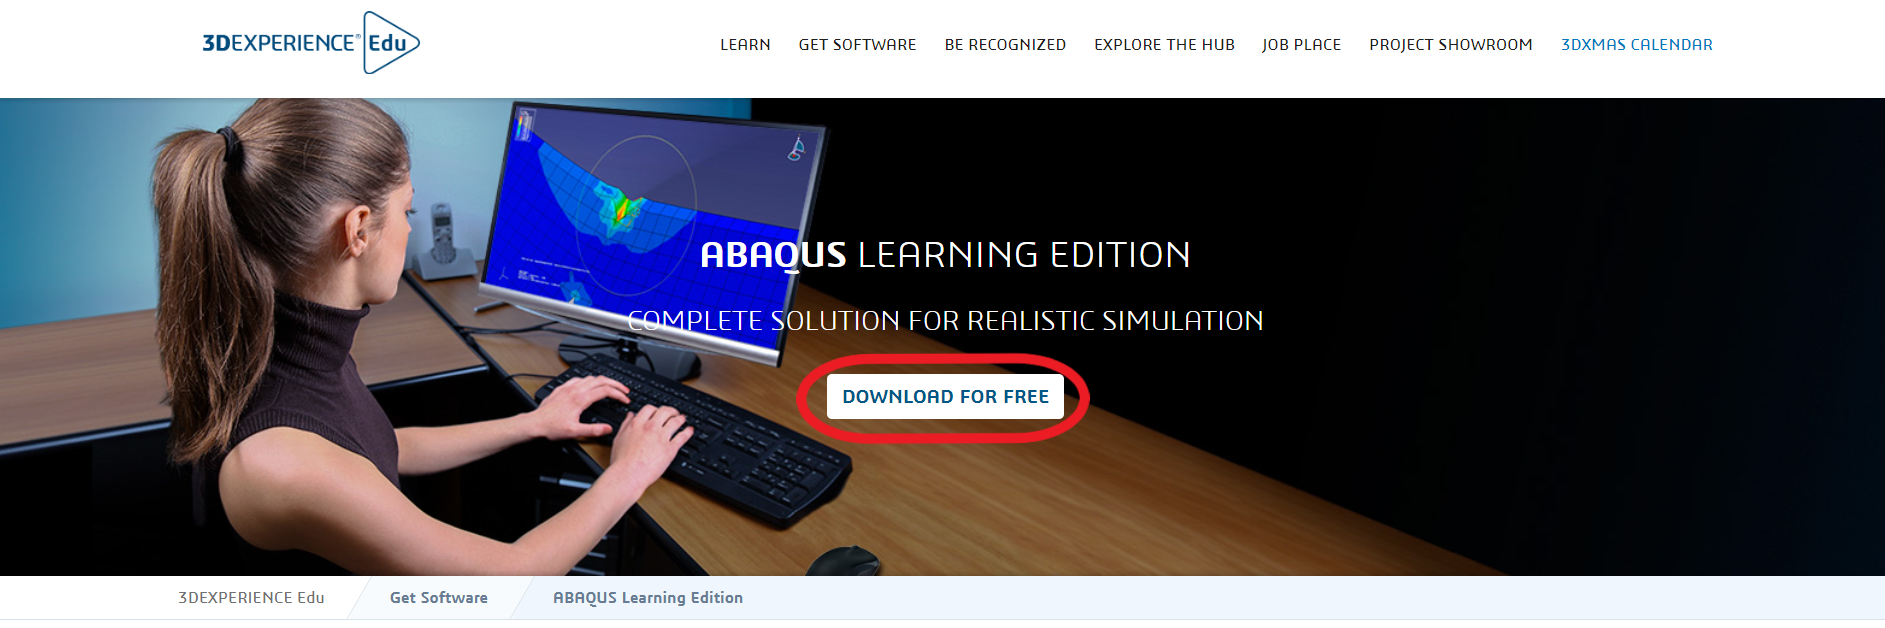 Downloading Abaqus learning edition